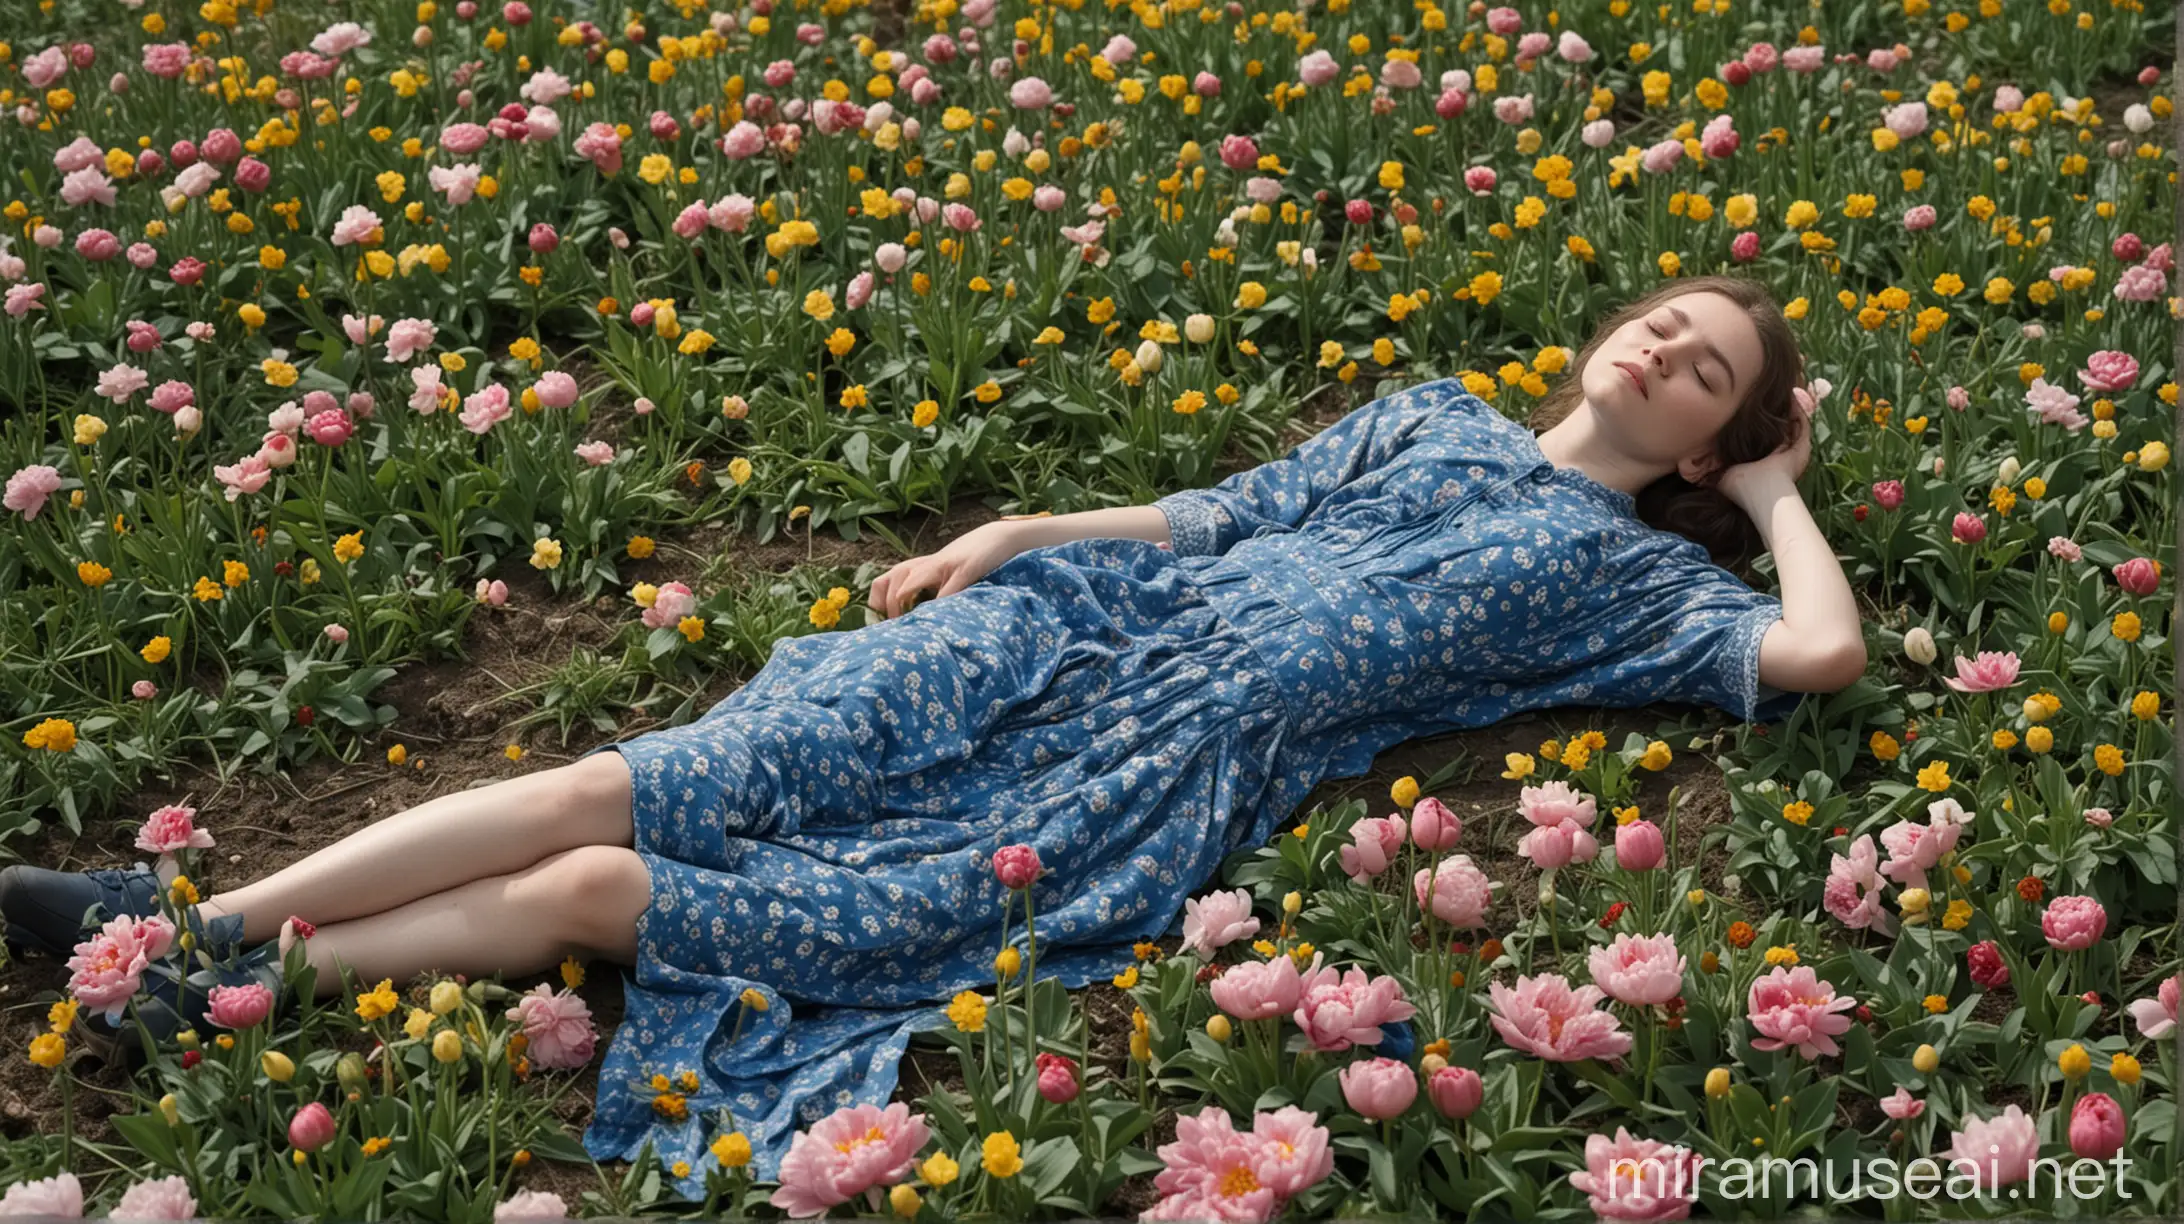 Lena, a worker, lies in an openwork blue dress in a field of peonies, daffodils, buttercups and burdocks and is sad